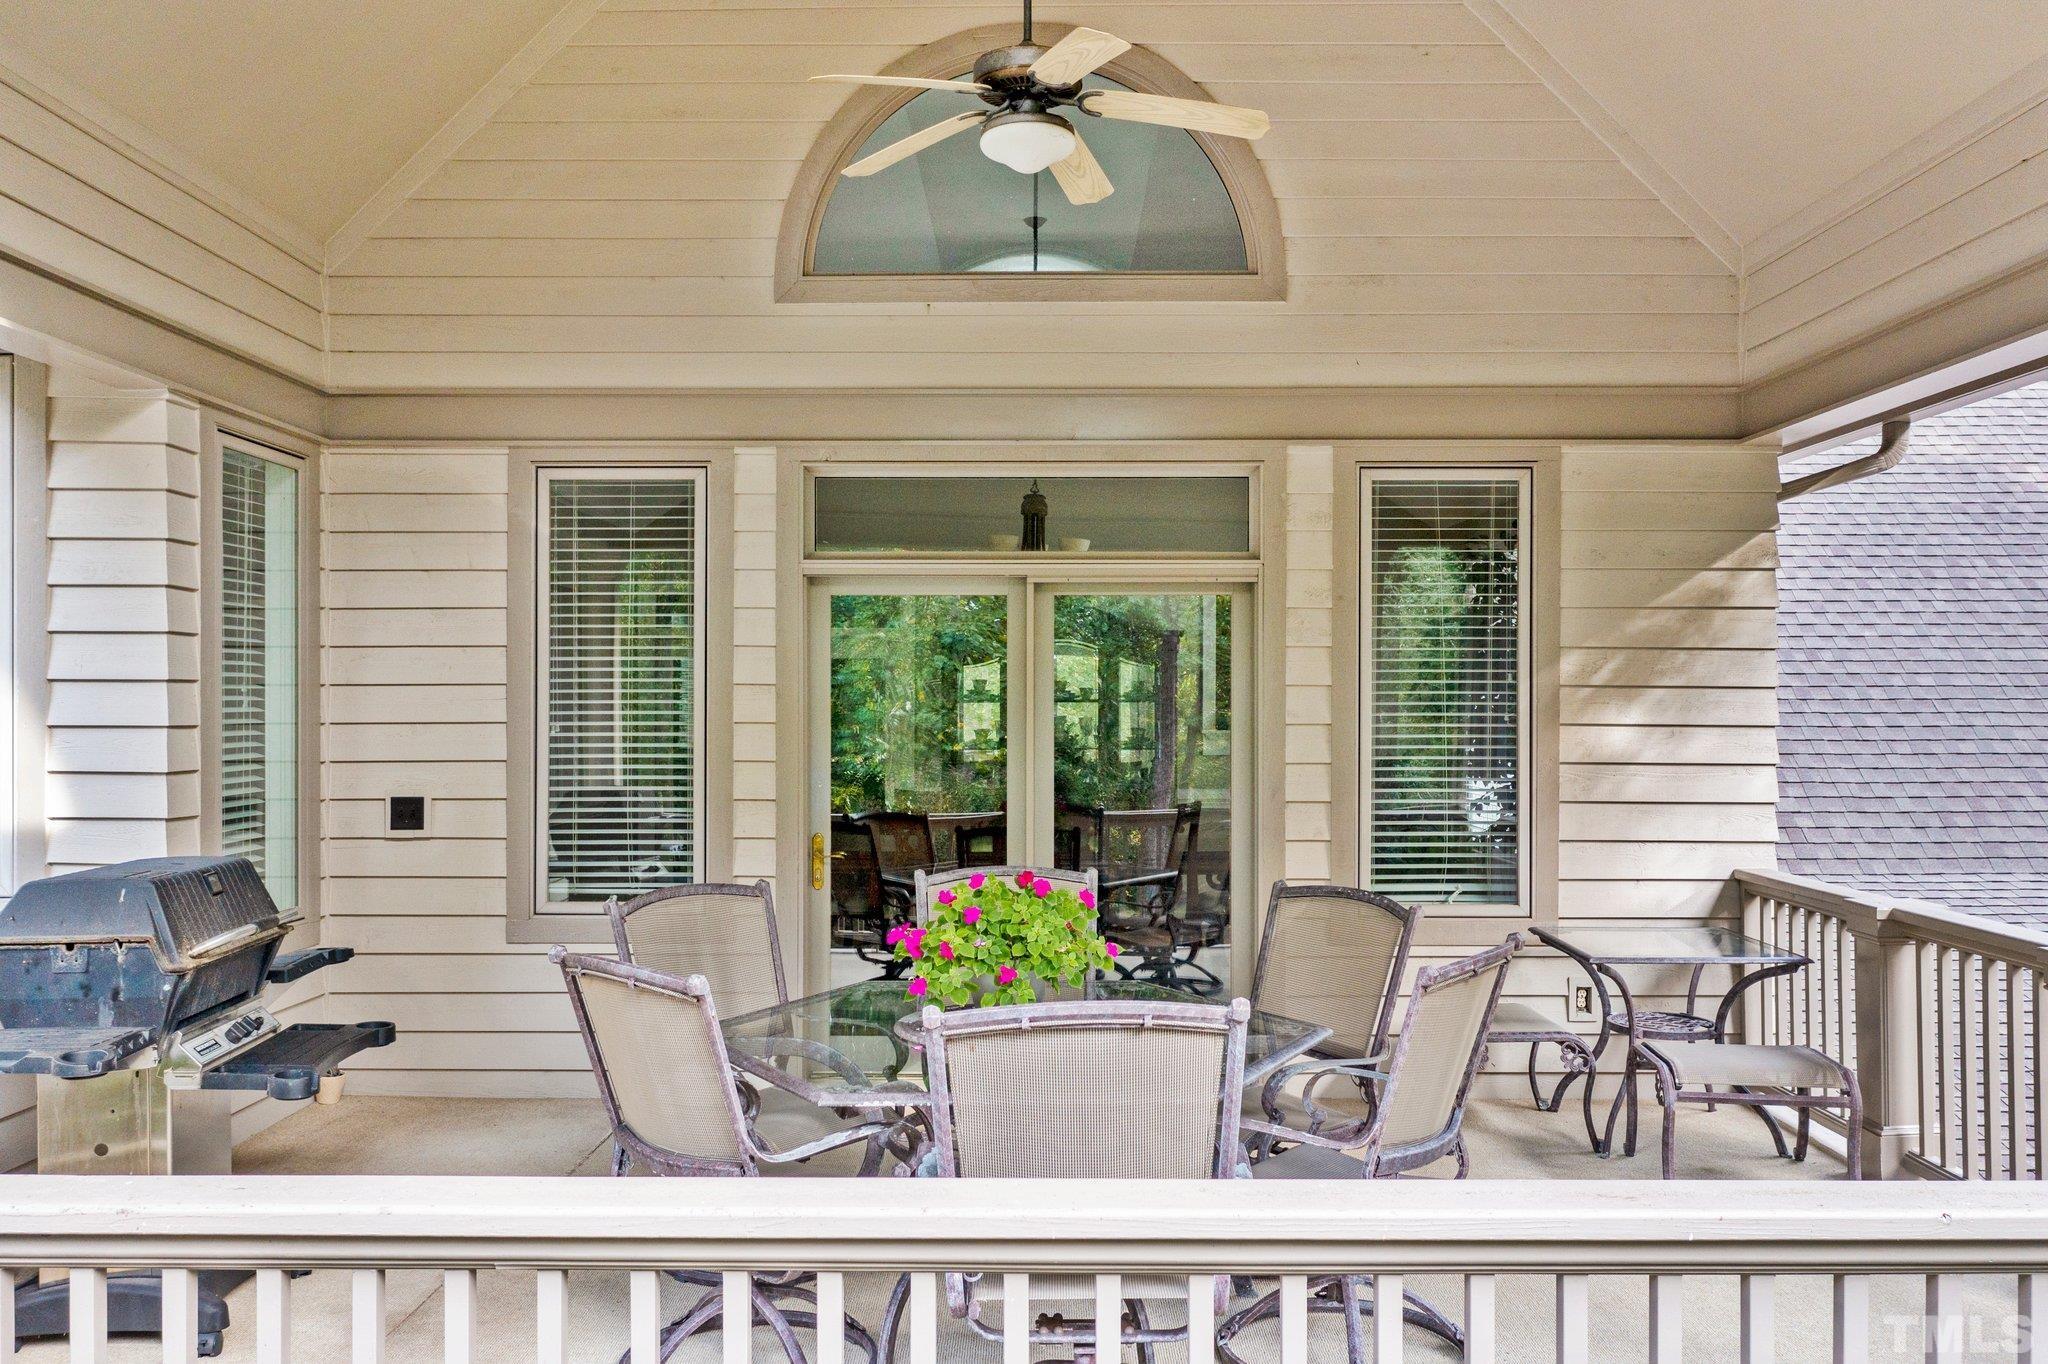 Step out of your dining room onto the porch with the sounds of nature and the peace that comes with privacy.